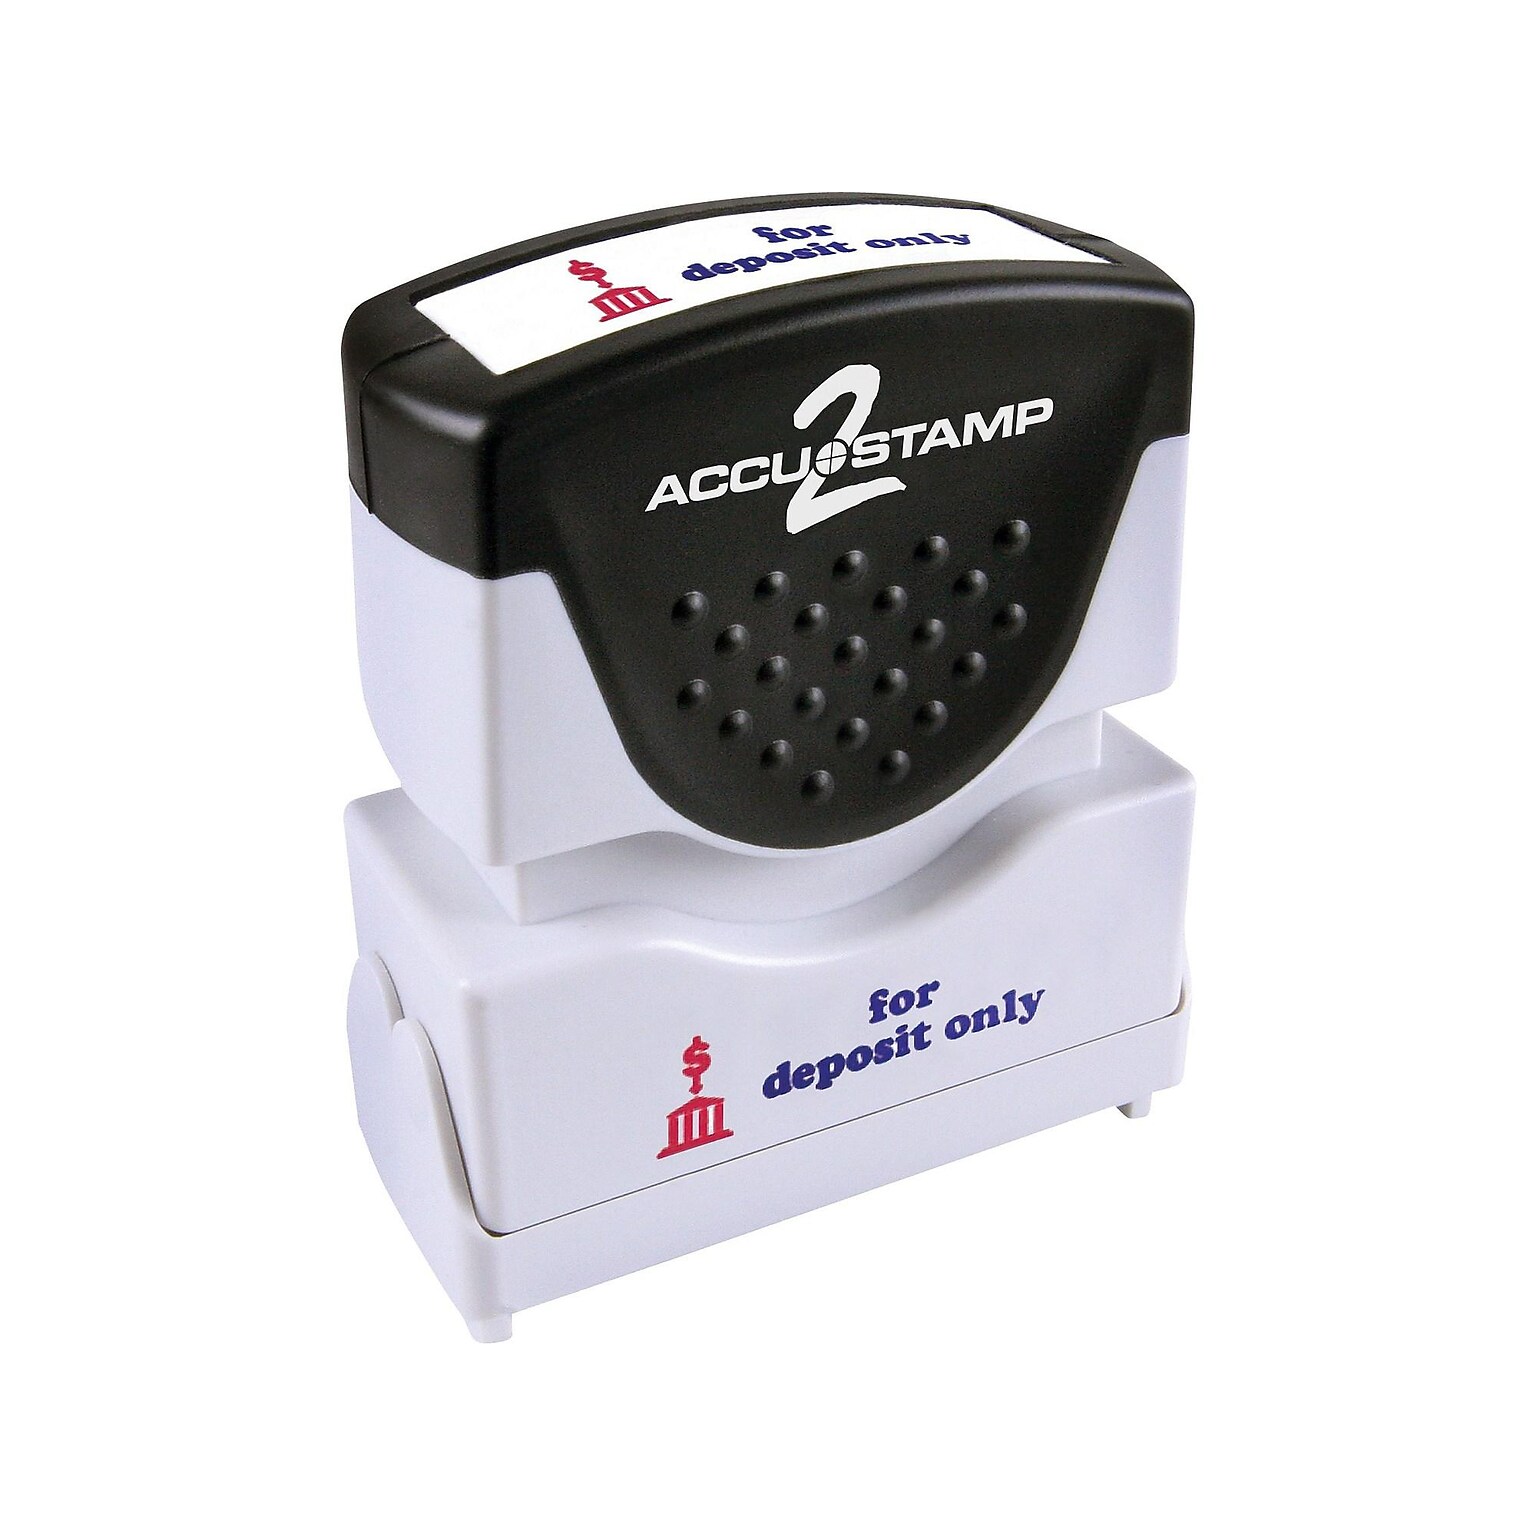 Accu-Stamp 2 Pre-Inked Stamp, For Deposit Only, Blue and Red Inks (035523)